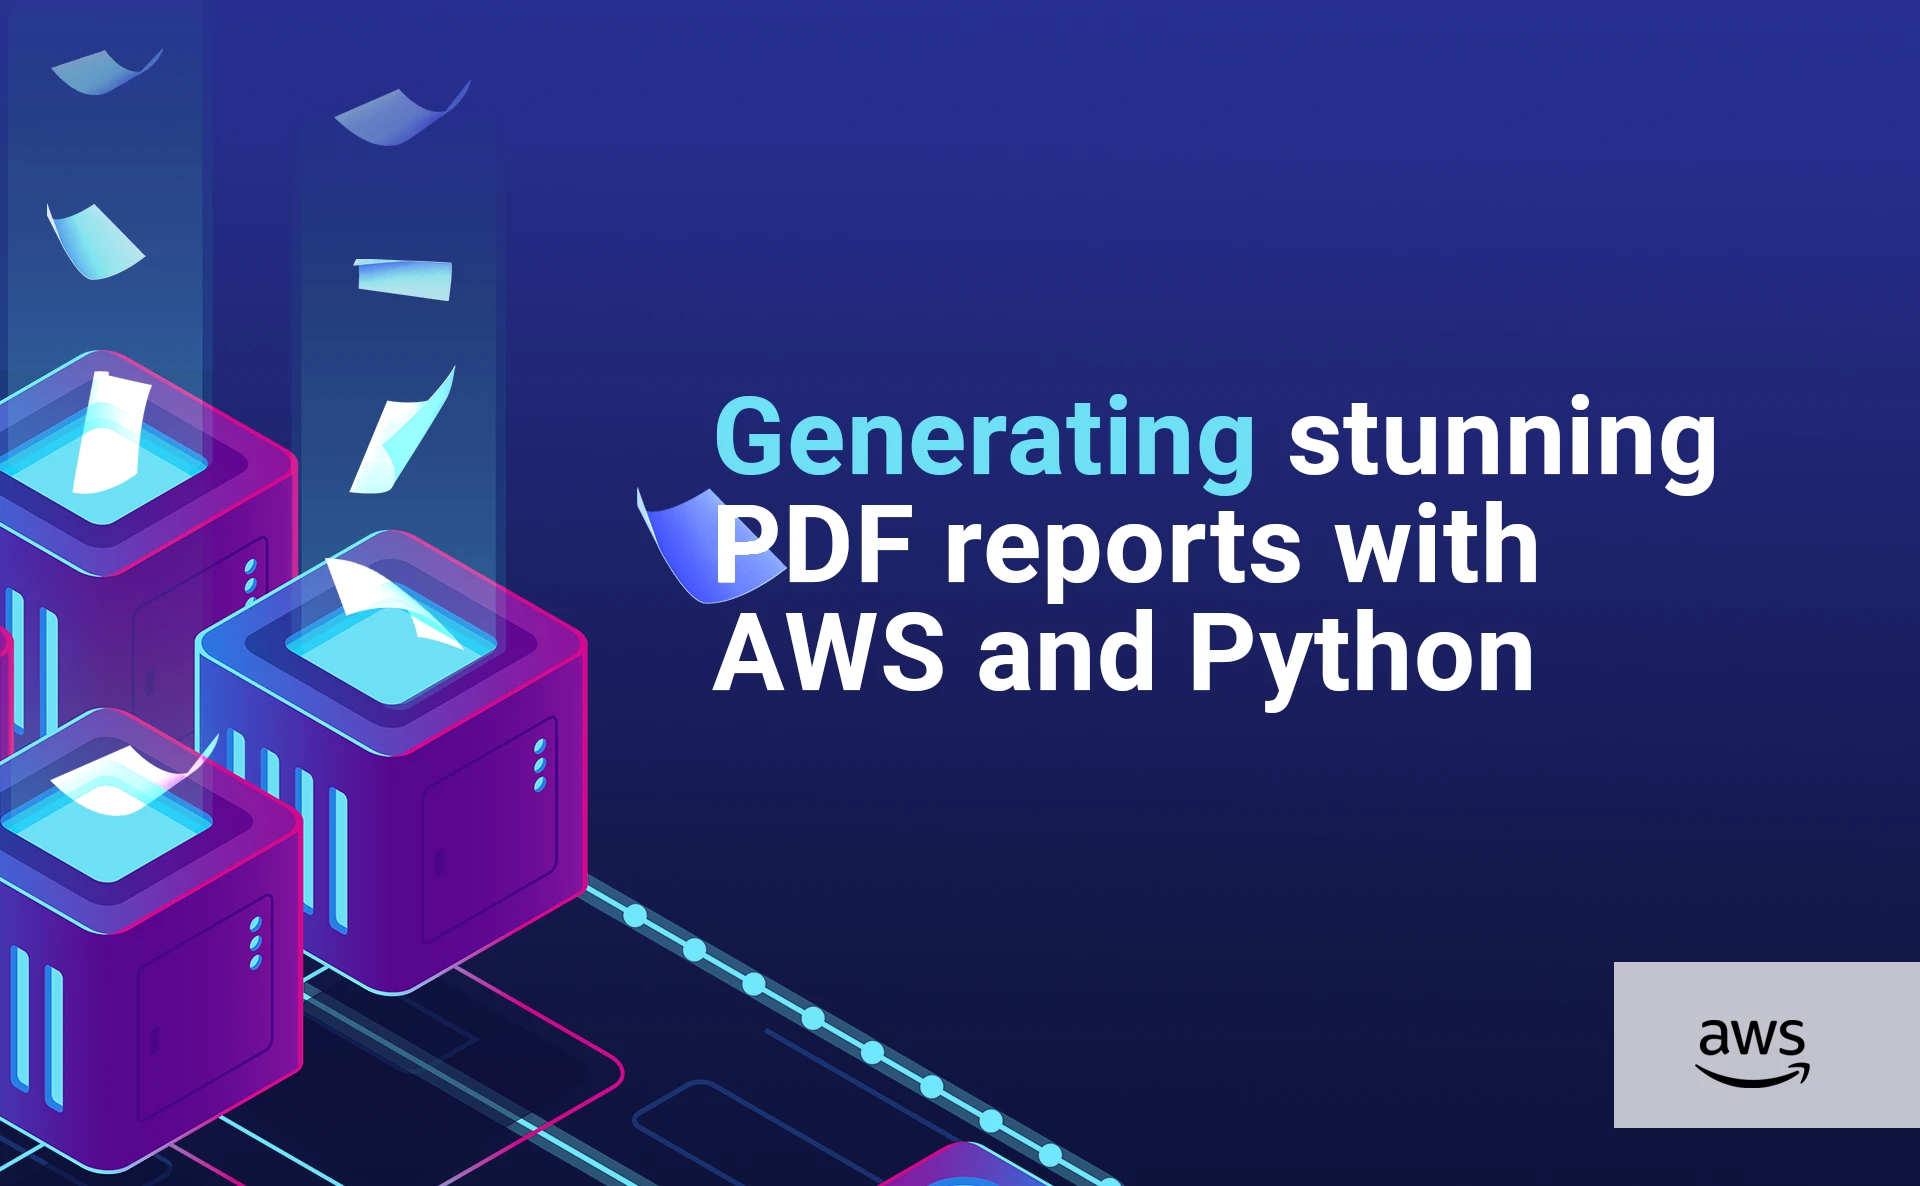 Generating stunning PDF reports with AWS and Python